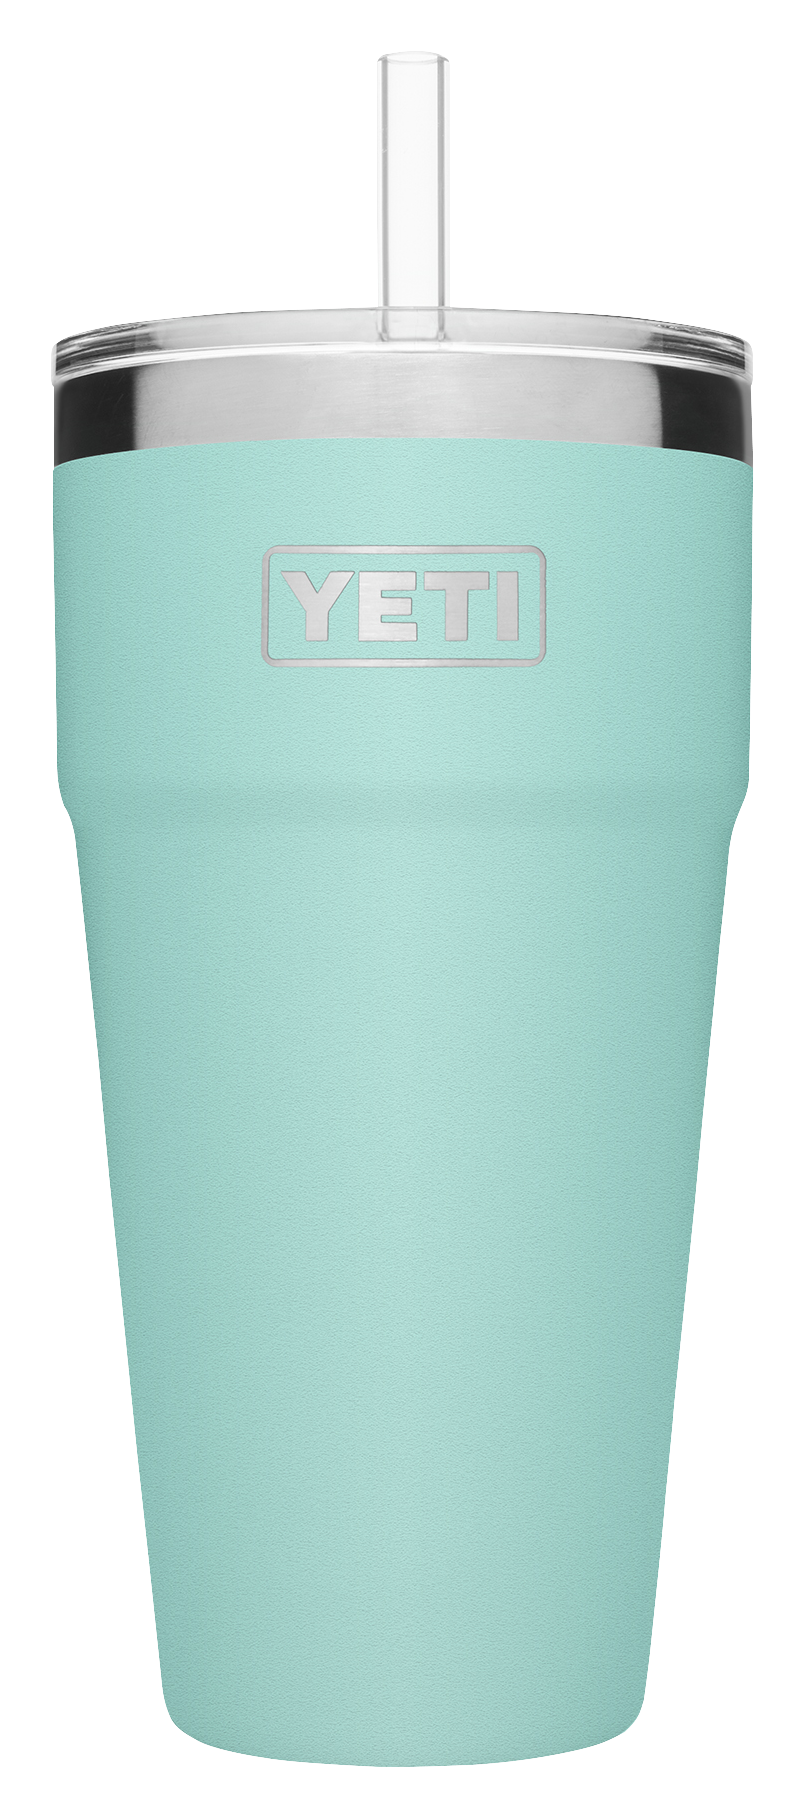 YETI Black Rambler 26 oz Stackable Cup with Straw Lid